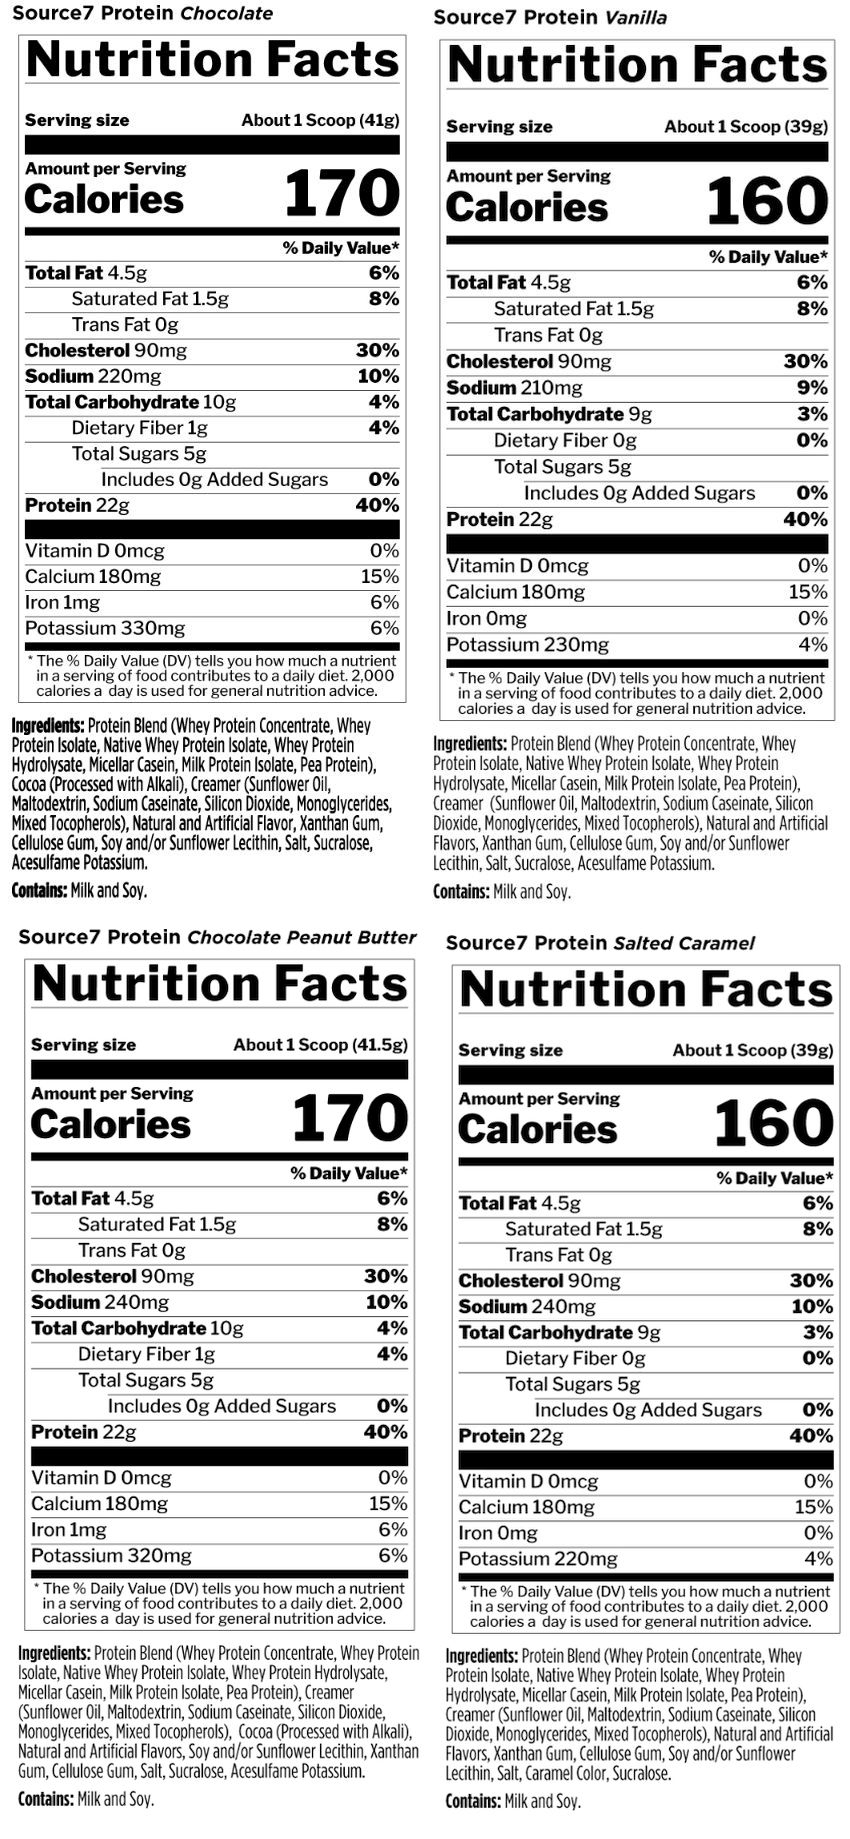 Nutritional details for Source7 Protein in Vanilla, Chocolate, Peanut Butter, and Salted Caramel flavors, with 22g protein and 1.5g saturated fat per scoop.